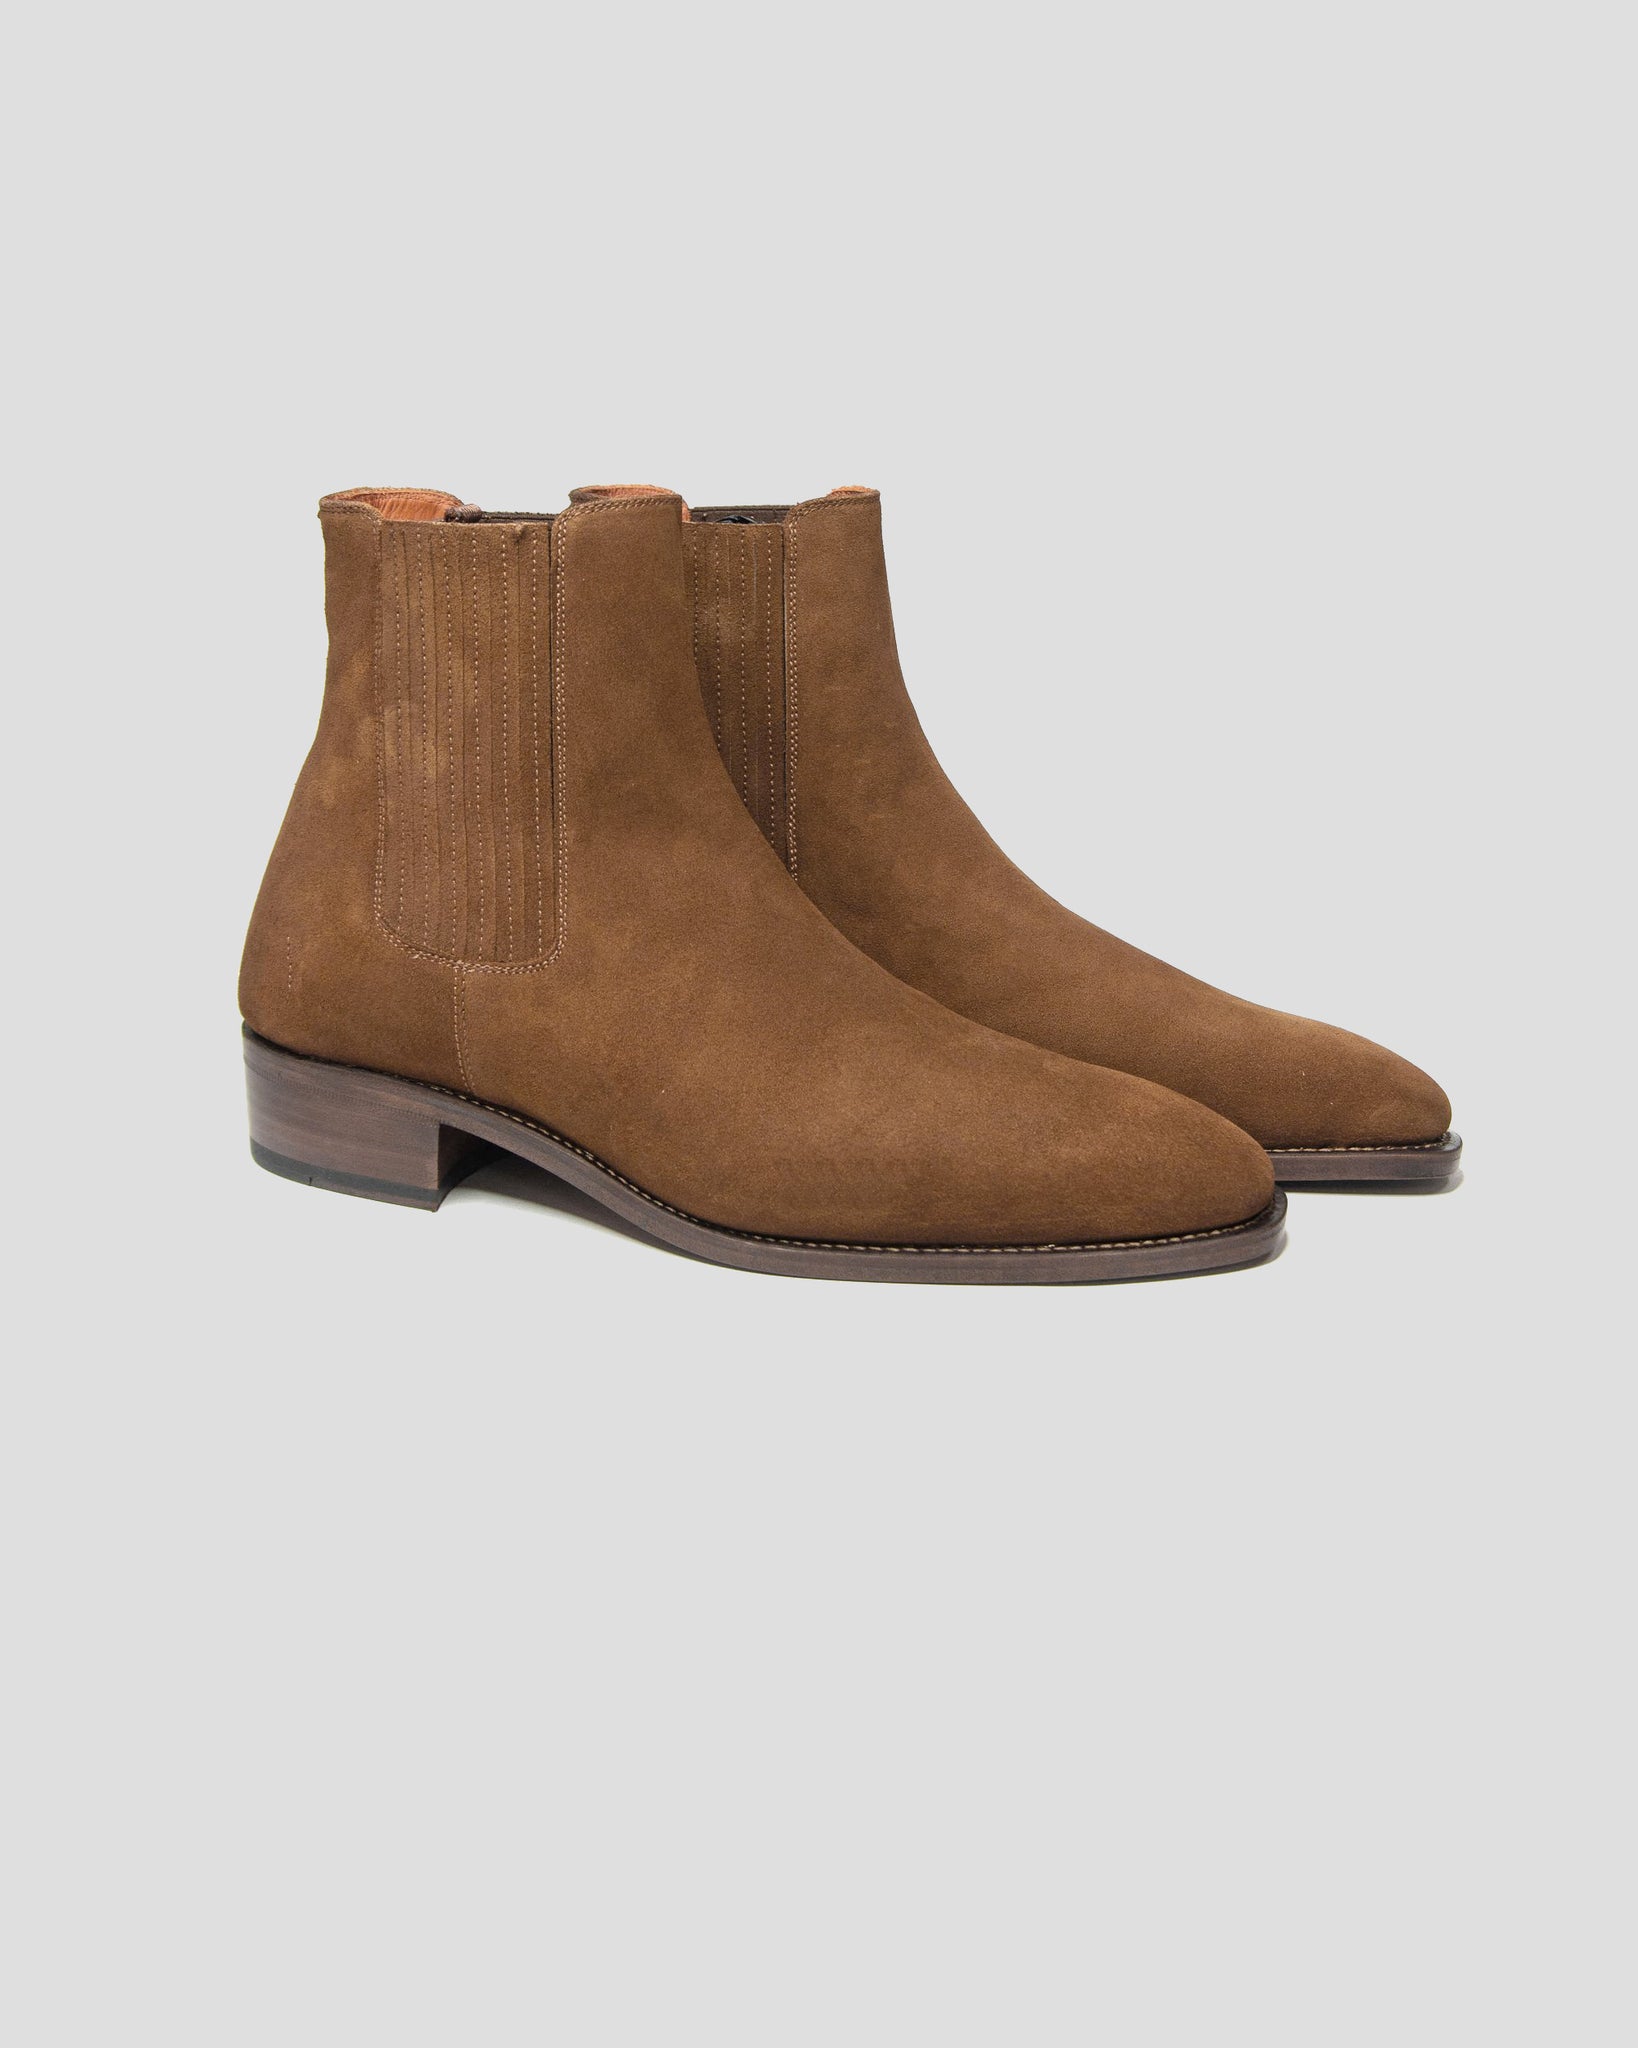 Southern Gents Damien Chelsea Boot - Coffee Suede